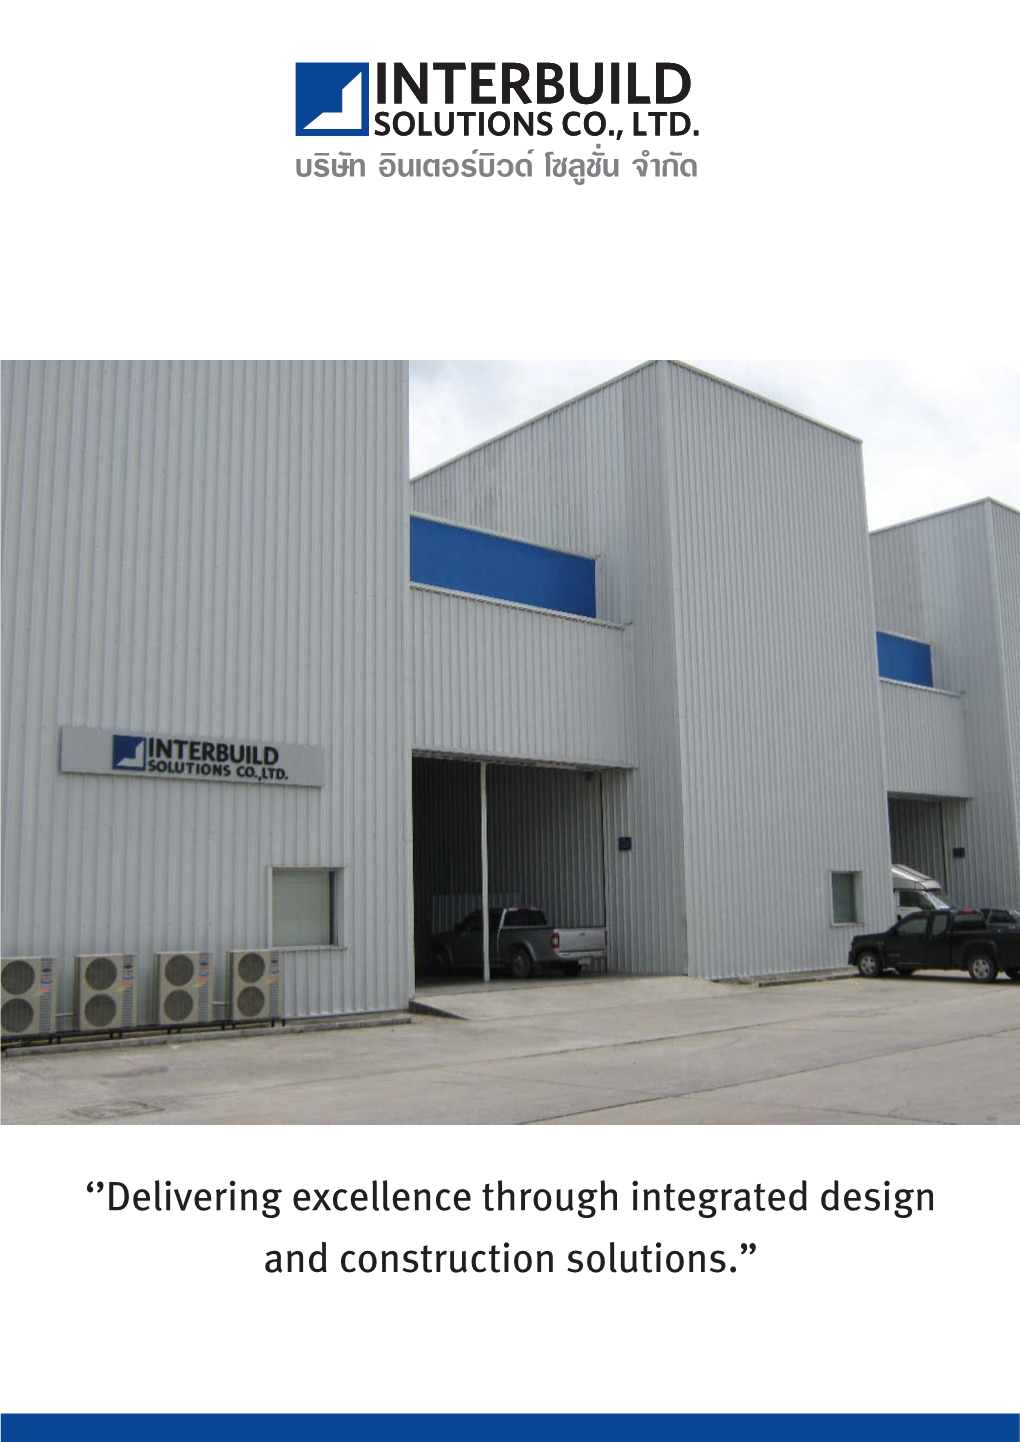 ''Delivering Excellence Through Integrated Design and Construction